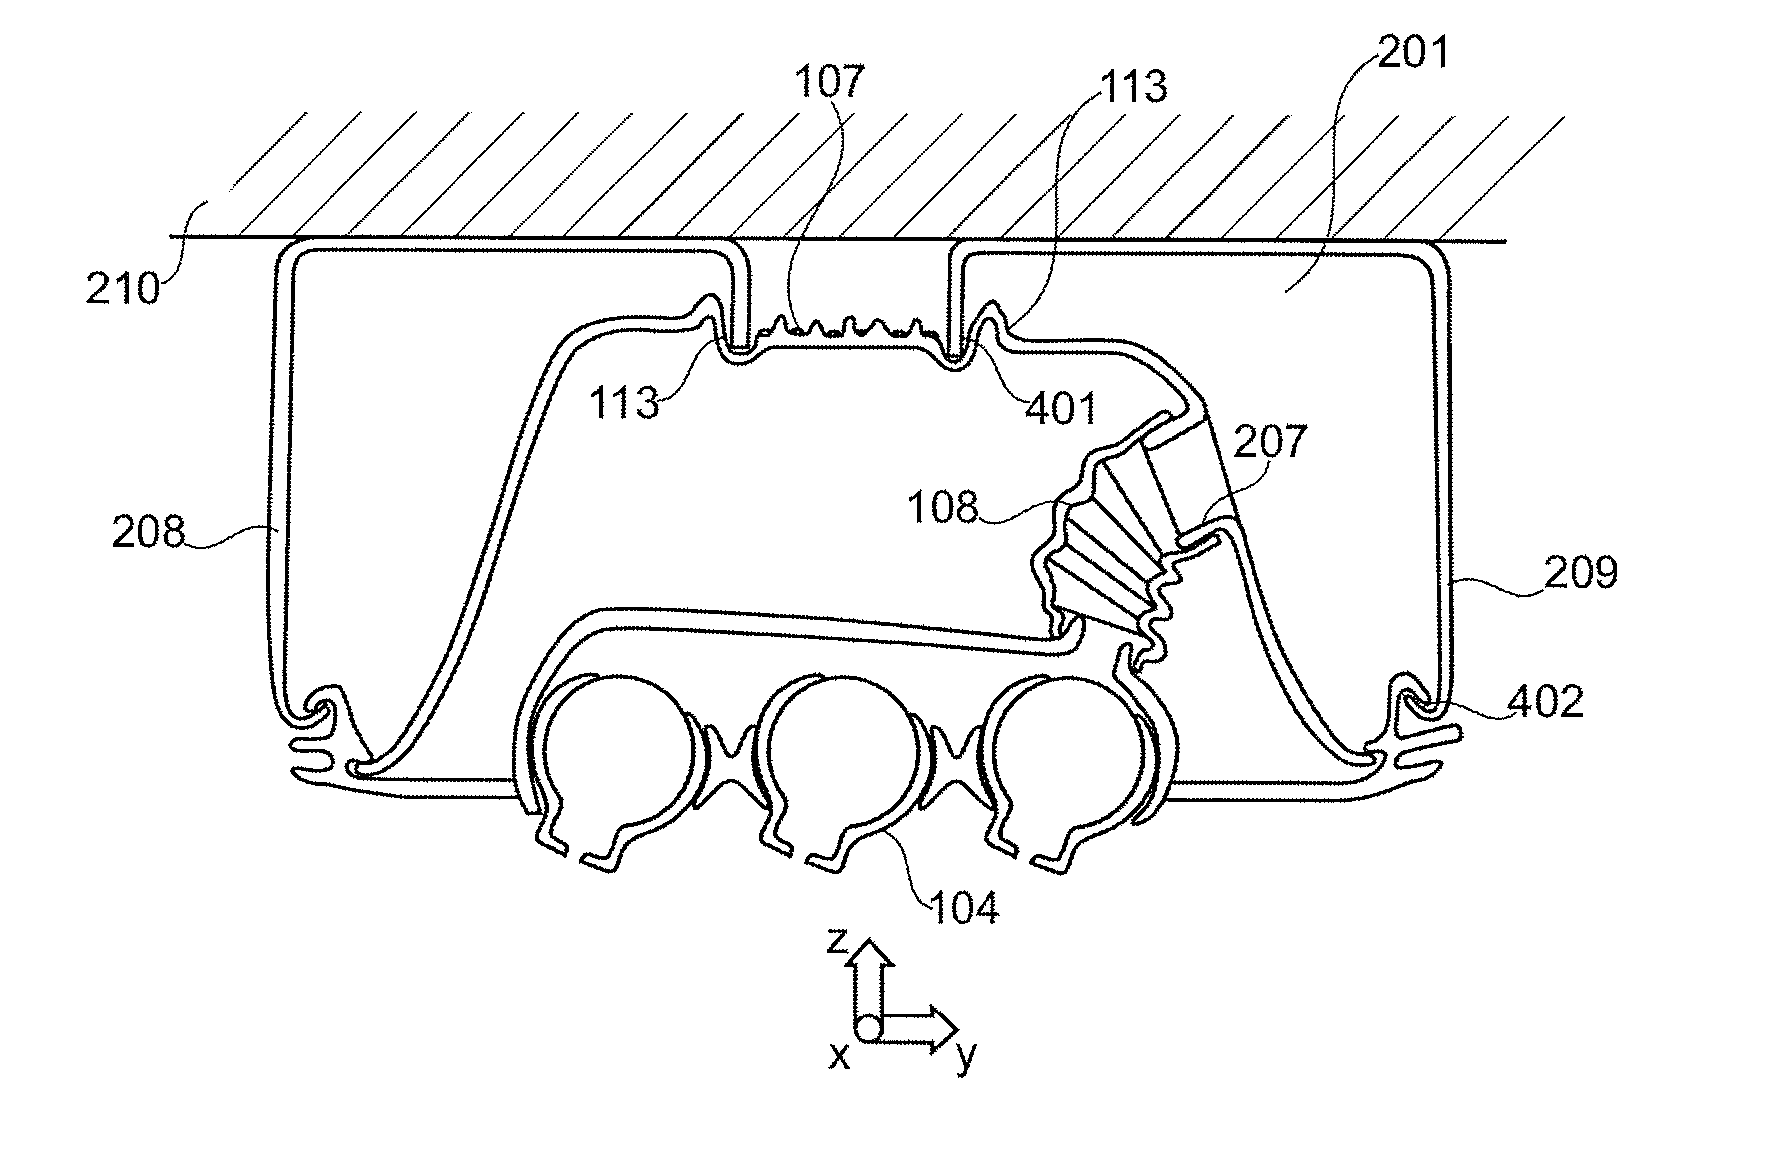 Supply unit for flexible supply channels